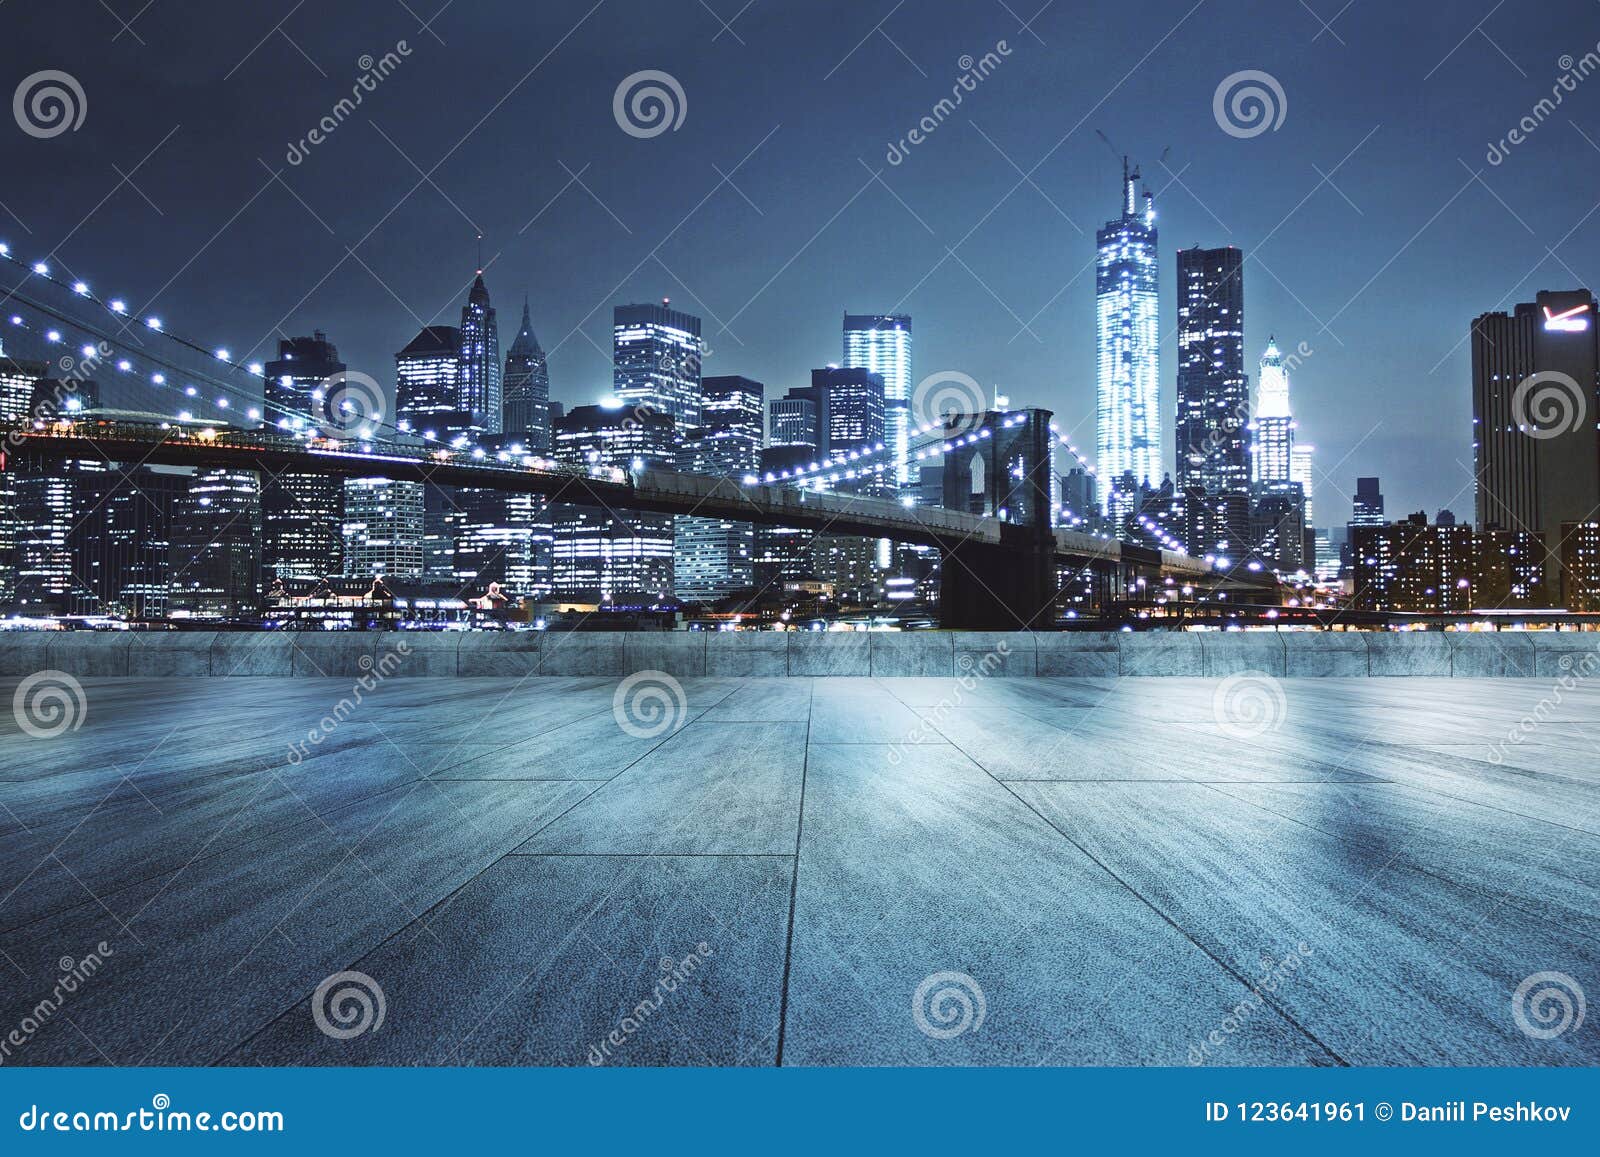 Rooftop with Night City Background Stock Image - Image of concrete,  abstract: 123641961